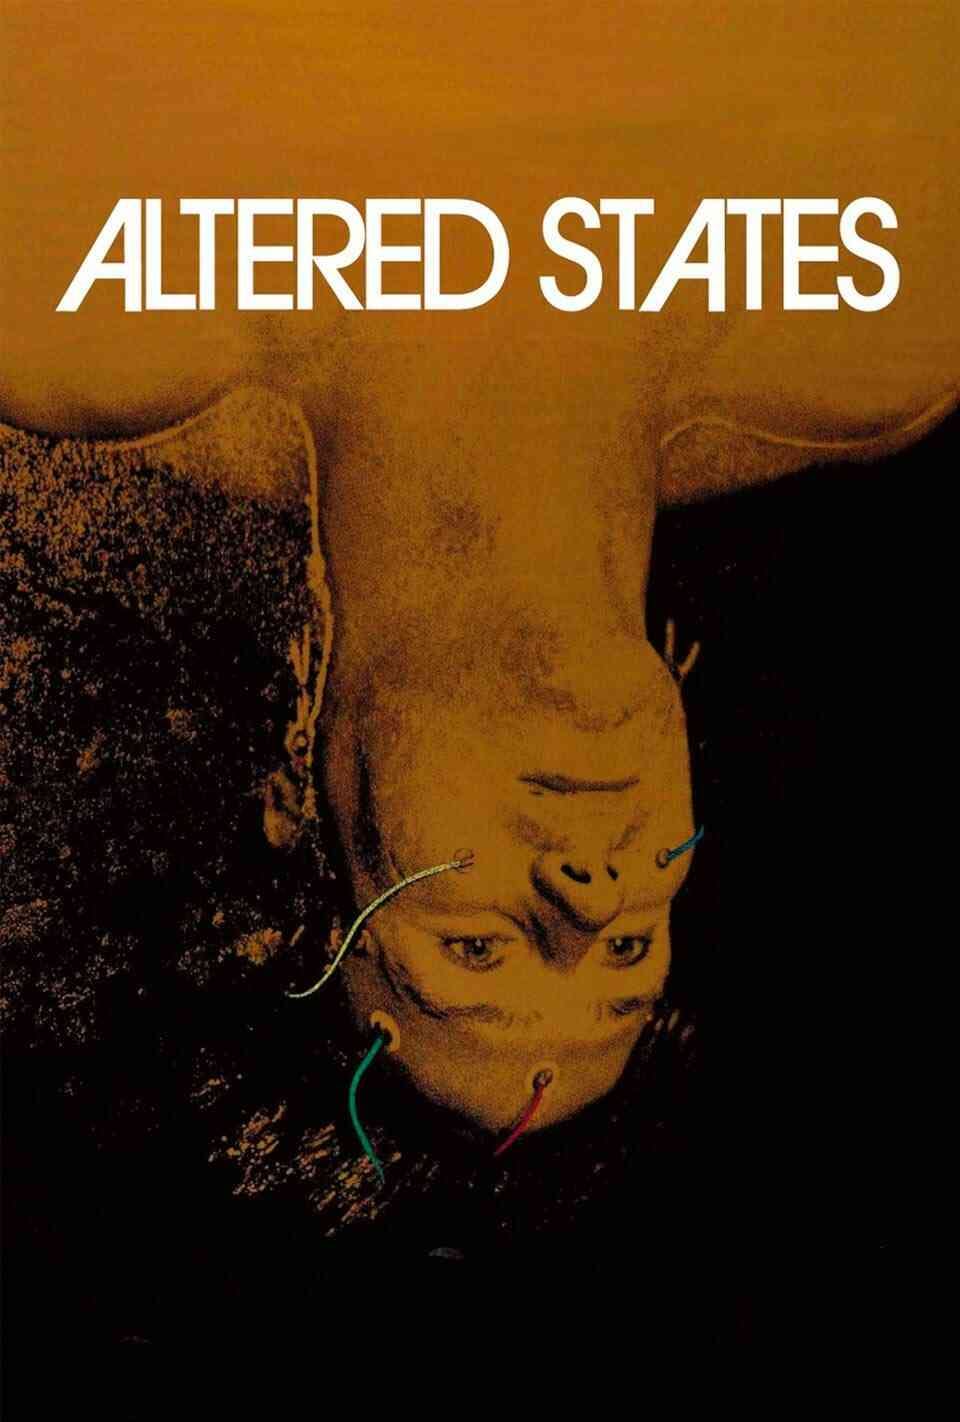 Read Altered States screenplay.